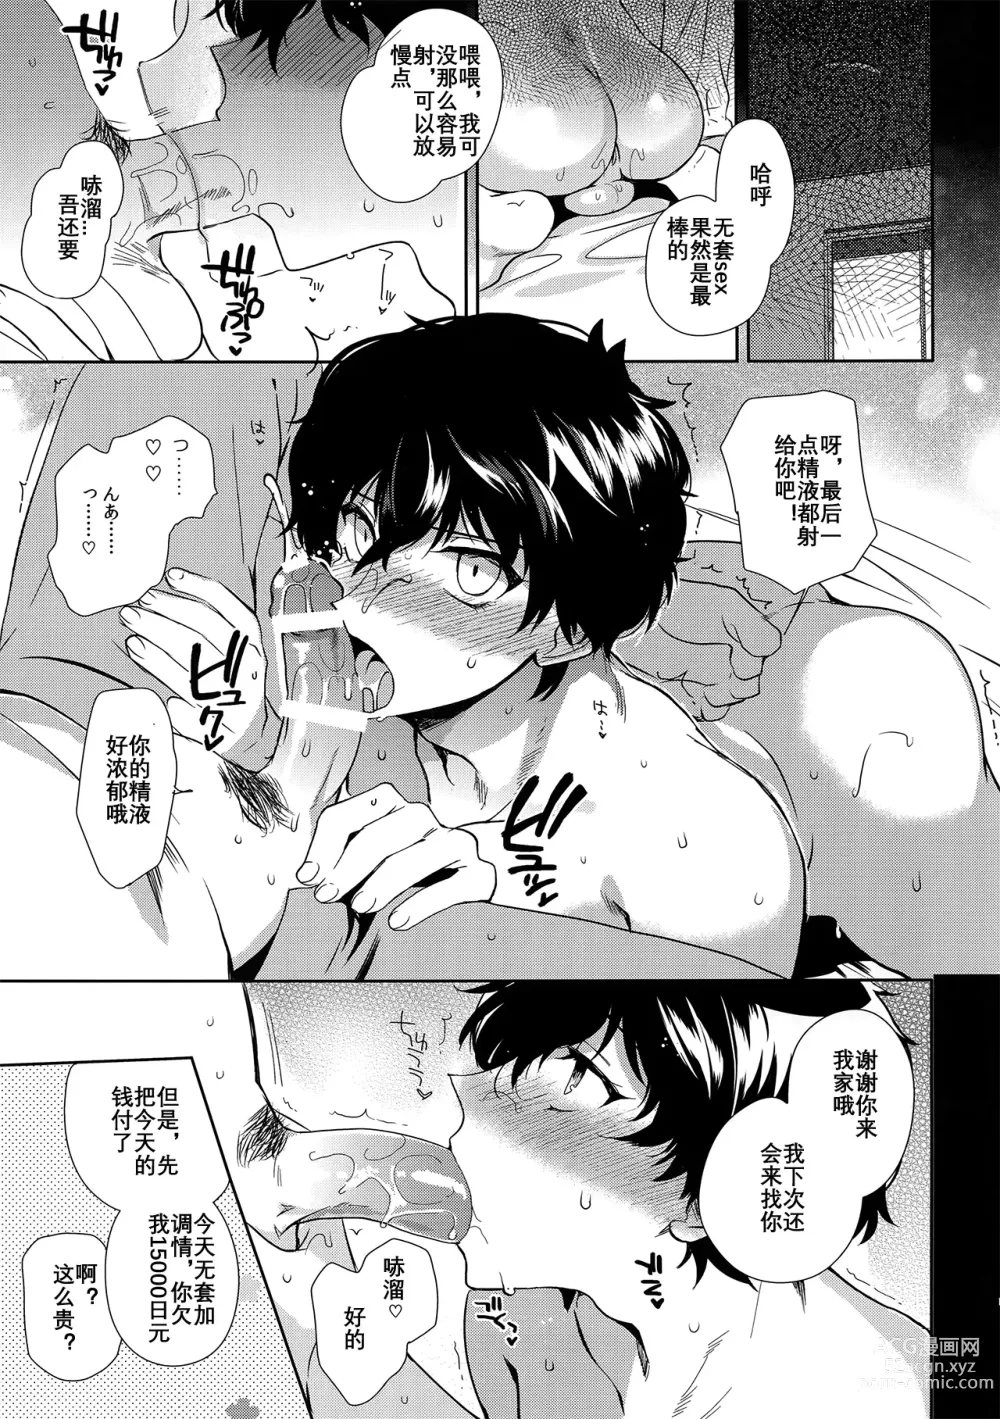 Page 14 of doujinshi JOKER-R (Persona 5) [Chinese] (JE个人汉化）